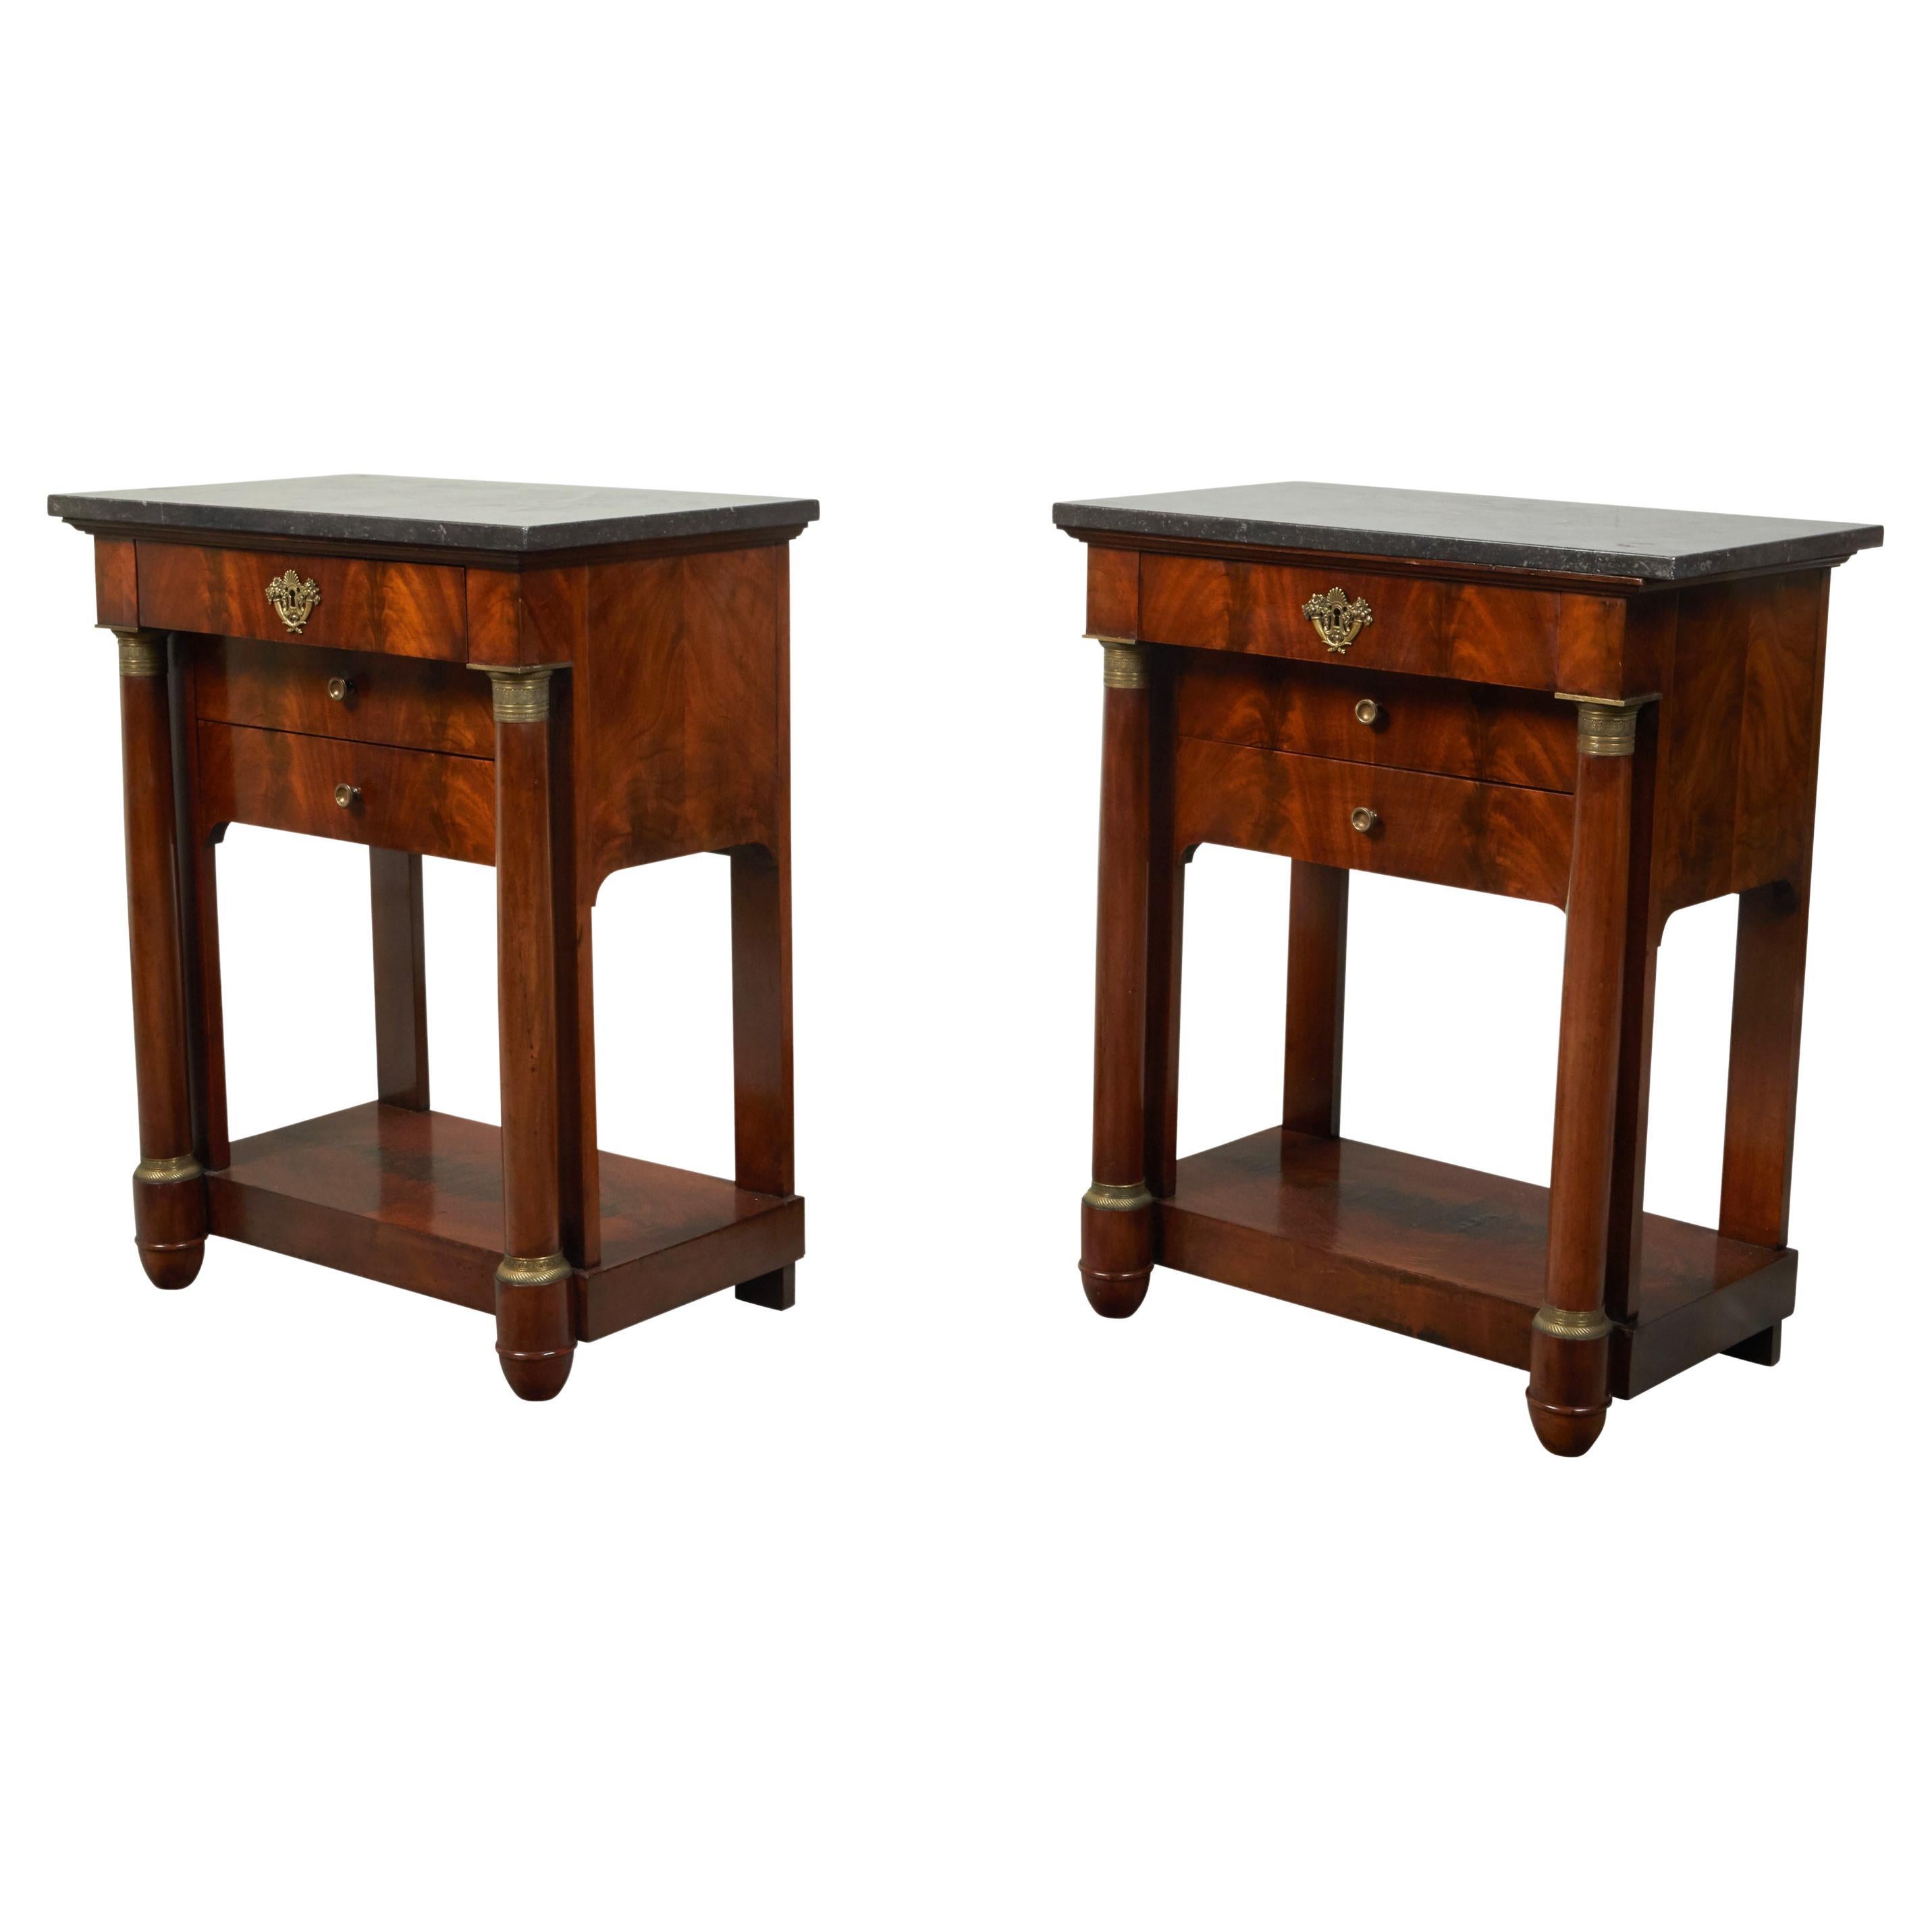 French Empire Early 19th Century Walnut Console Tables with Grey Marble Tops For Sale